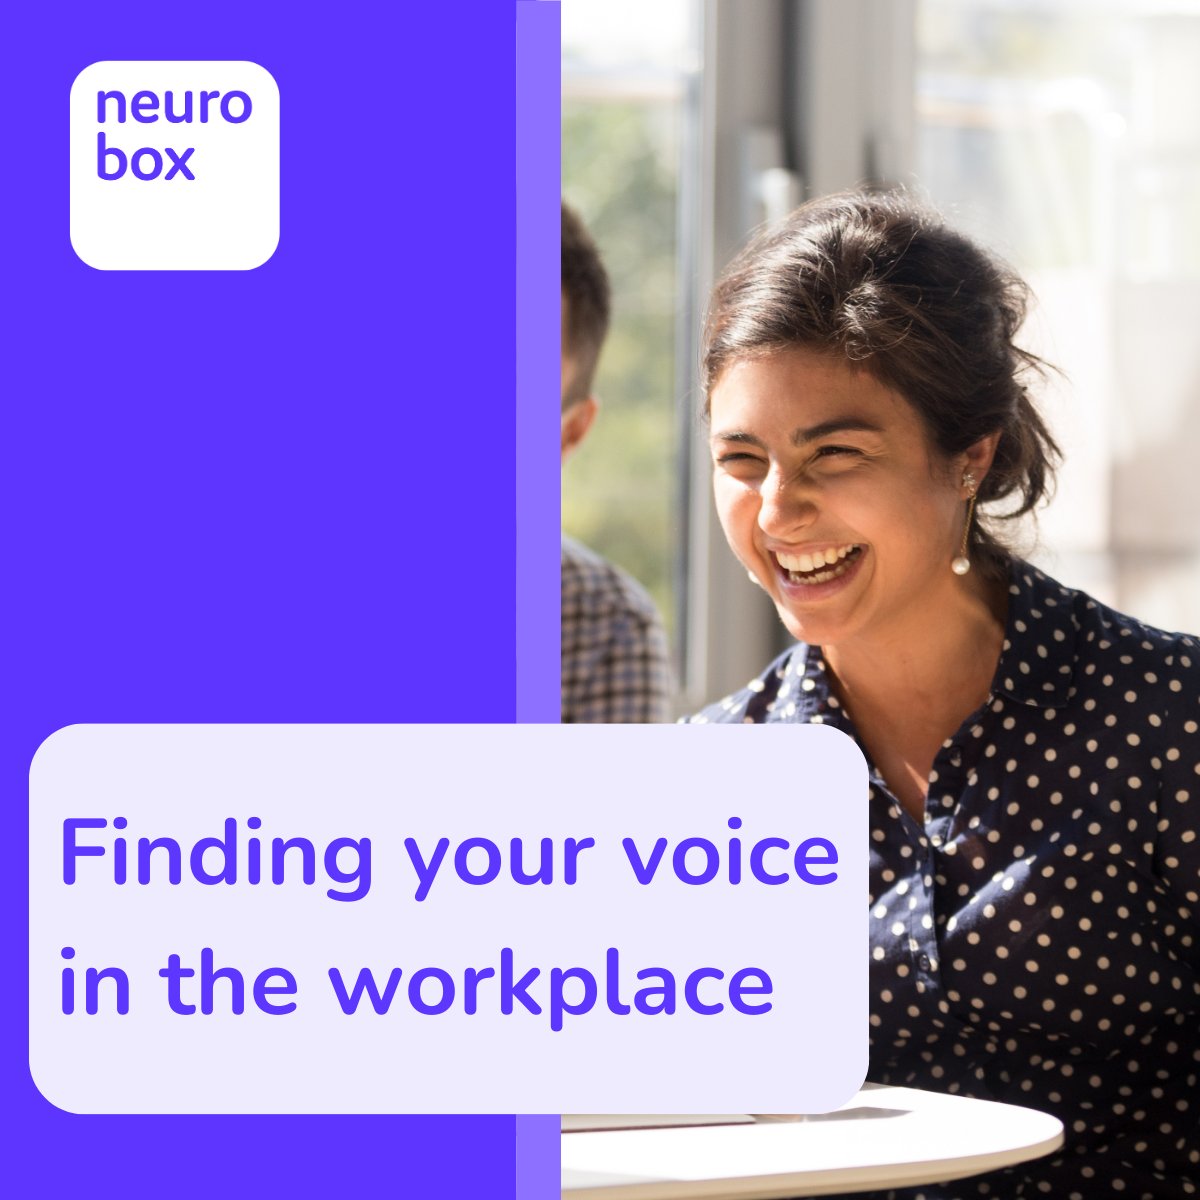 How would you encourage others to find their voice in the workplace? Hear what our champions have to say...

Finding your voice: champions advice 👉 eu1.hubs.ly/H08rJ2V0

#FindingYourVoice #NeurodiversityAtWork #Belonging